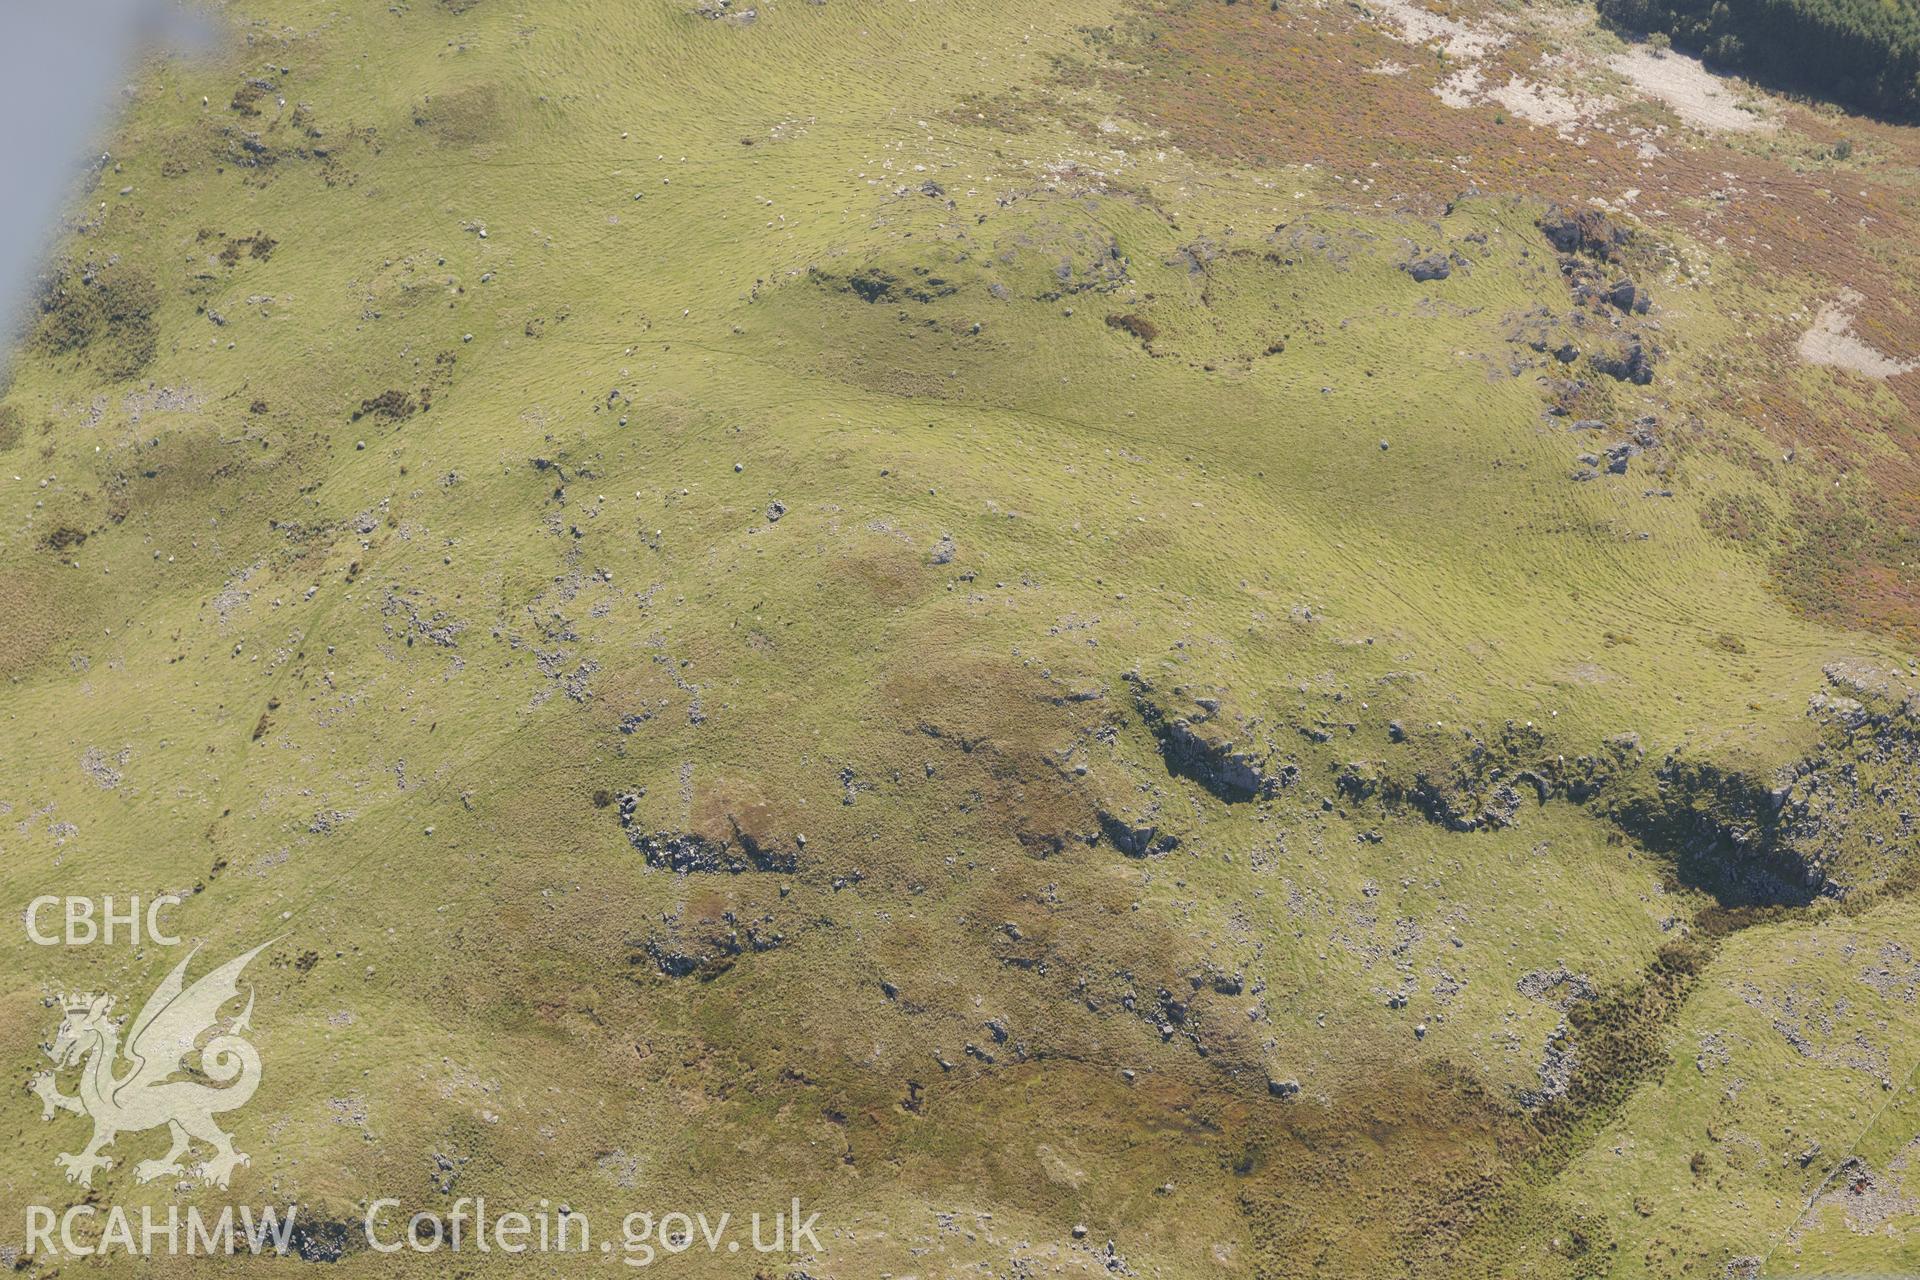 Settlement at Craig Tyn-y-Cornel, on the Esgair Berfa part of the Cadair Idris range. Oblique aerial photograph taken during the Royal Commission's programme of archaeological aerial reconnaissance by Toby Driver on 2nd October 2015.